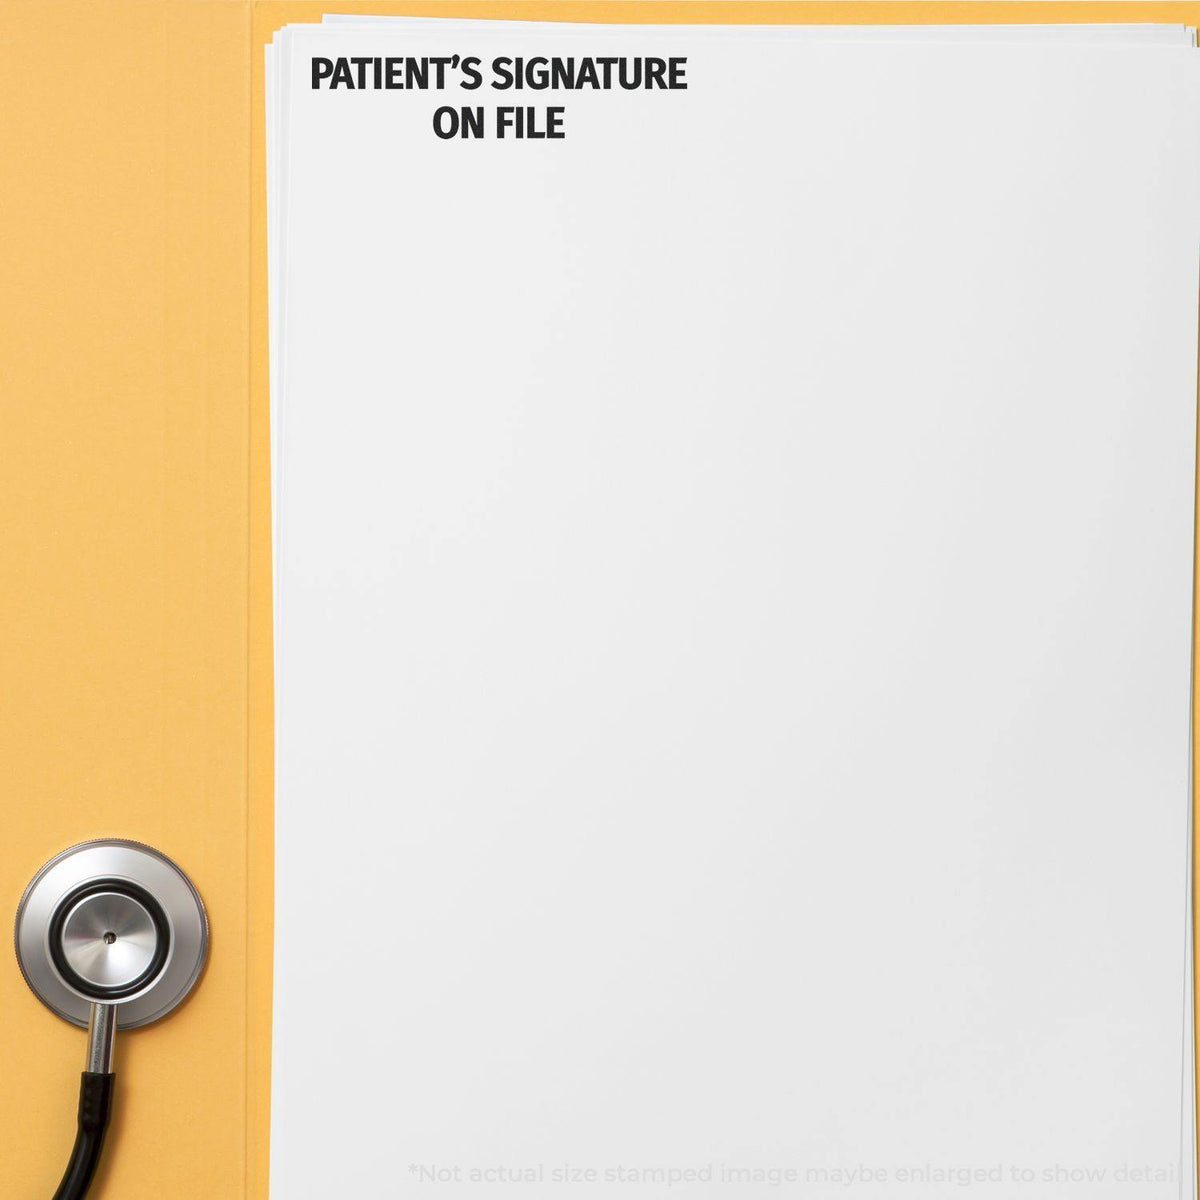 In Use Large Patients Signature on File Rubber Stamp Image